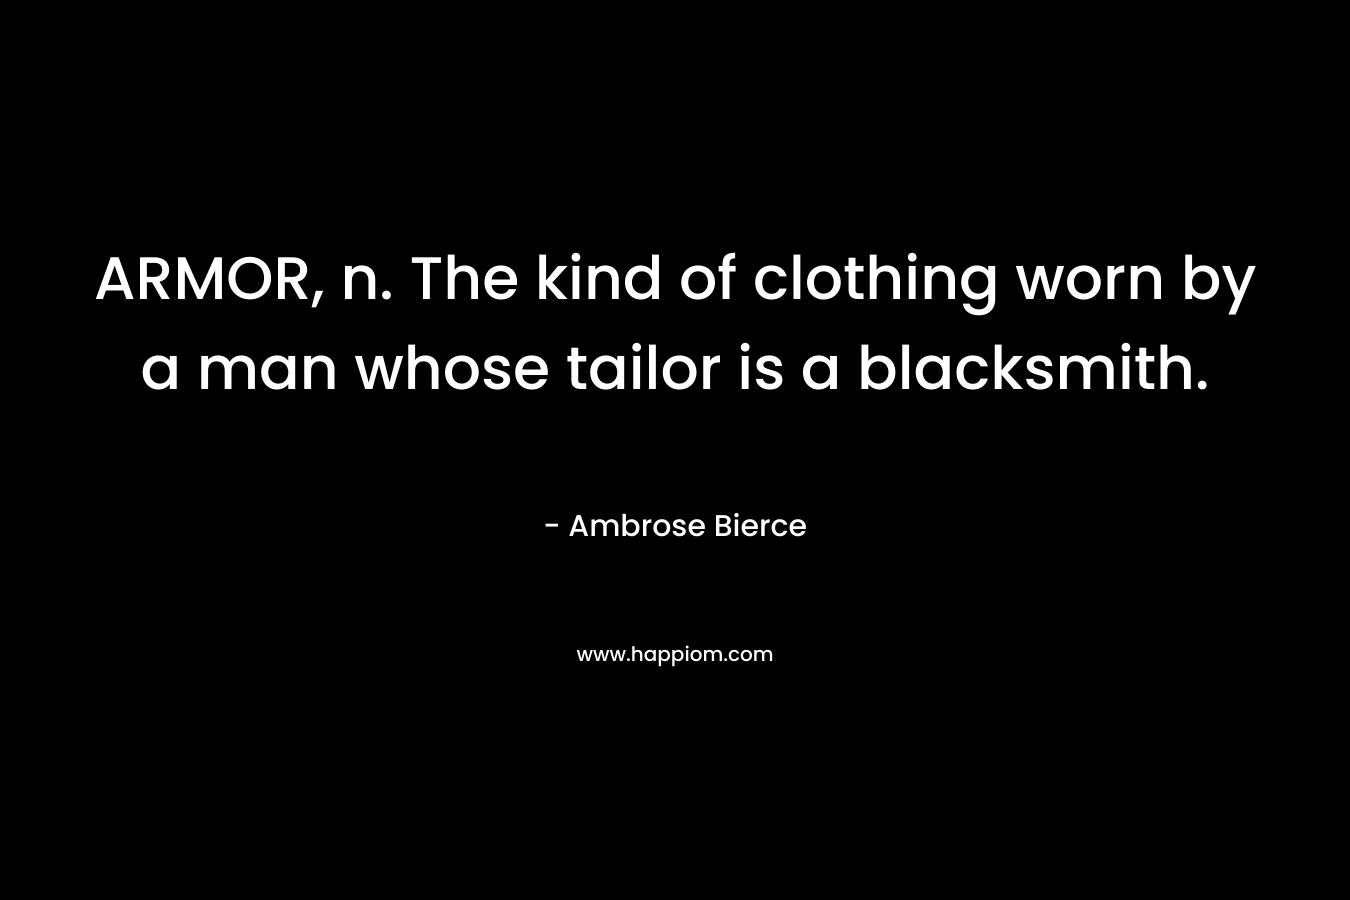 ARMOR, n. The kind of clothing worn by a man whose tailor is a blacksmith.